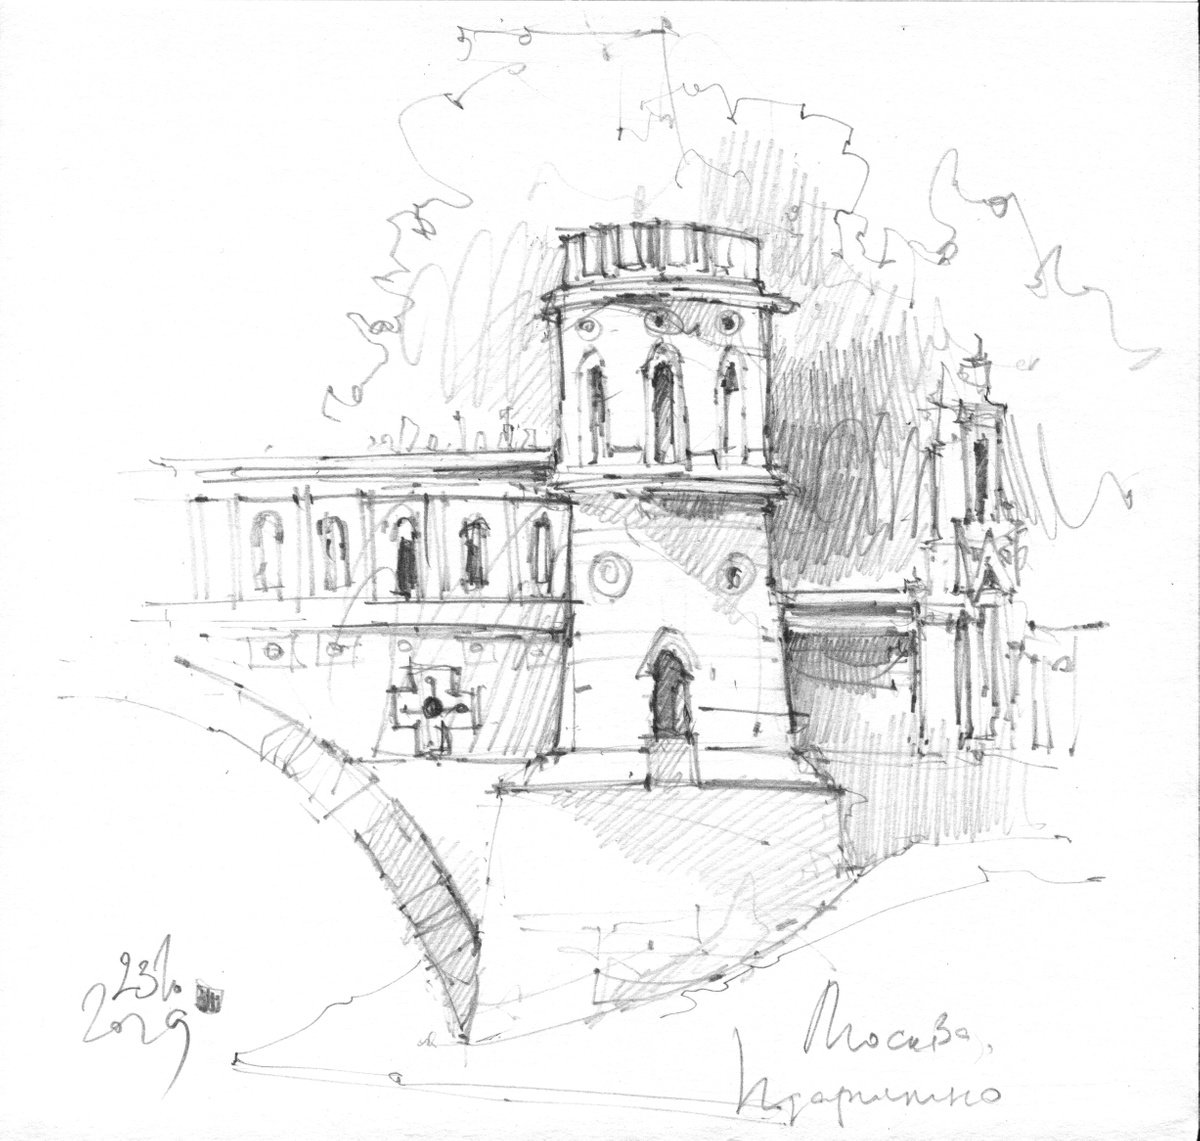 Architectural sketch original pencil drawing - Moscow by Ksenia Selianko